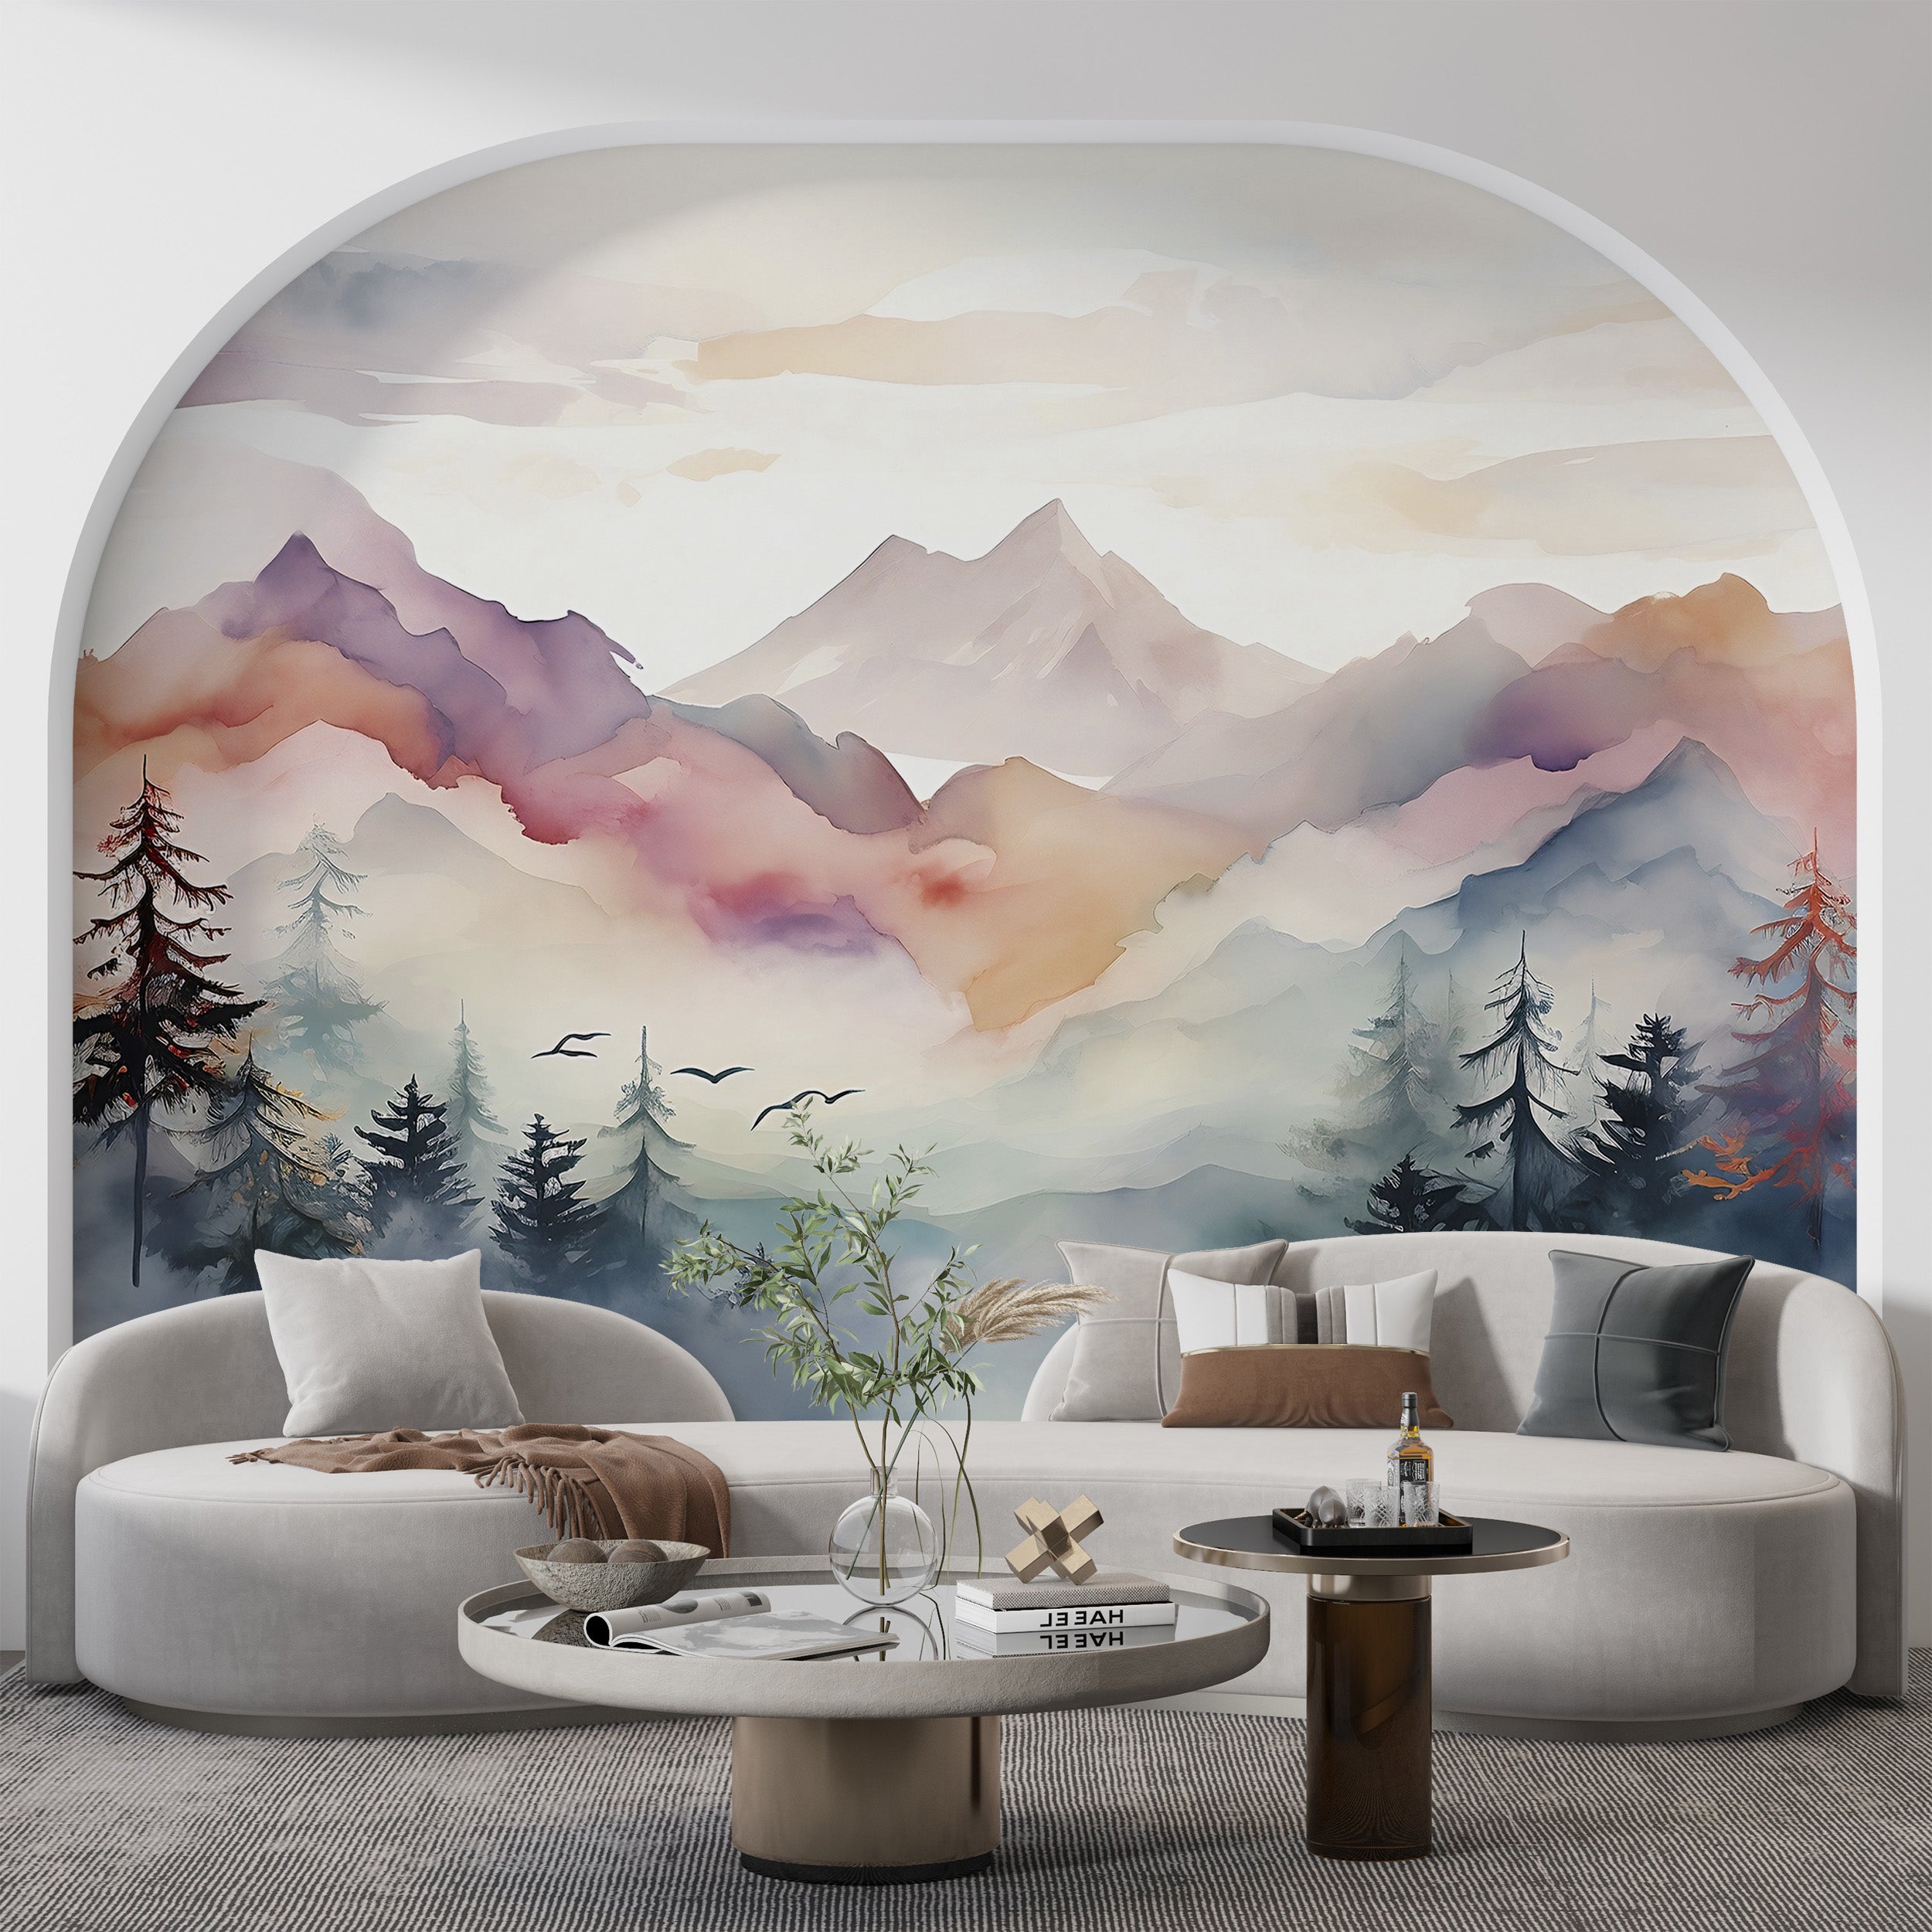 Captivating Nature-Inspired Wall Decor for Your Ambiance